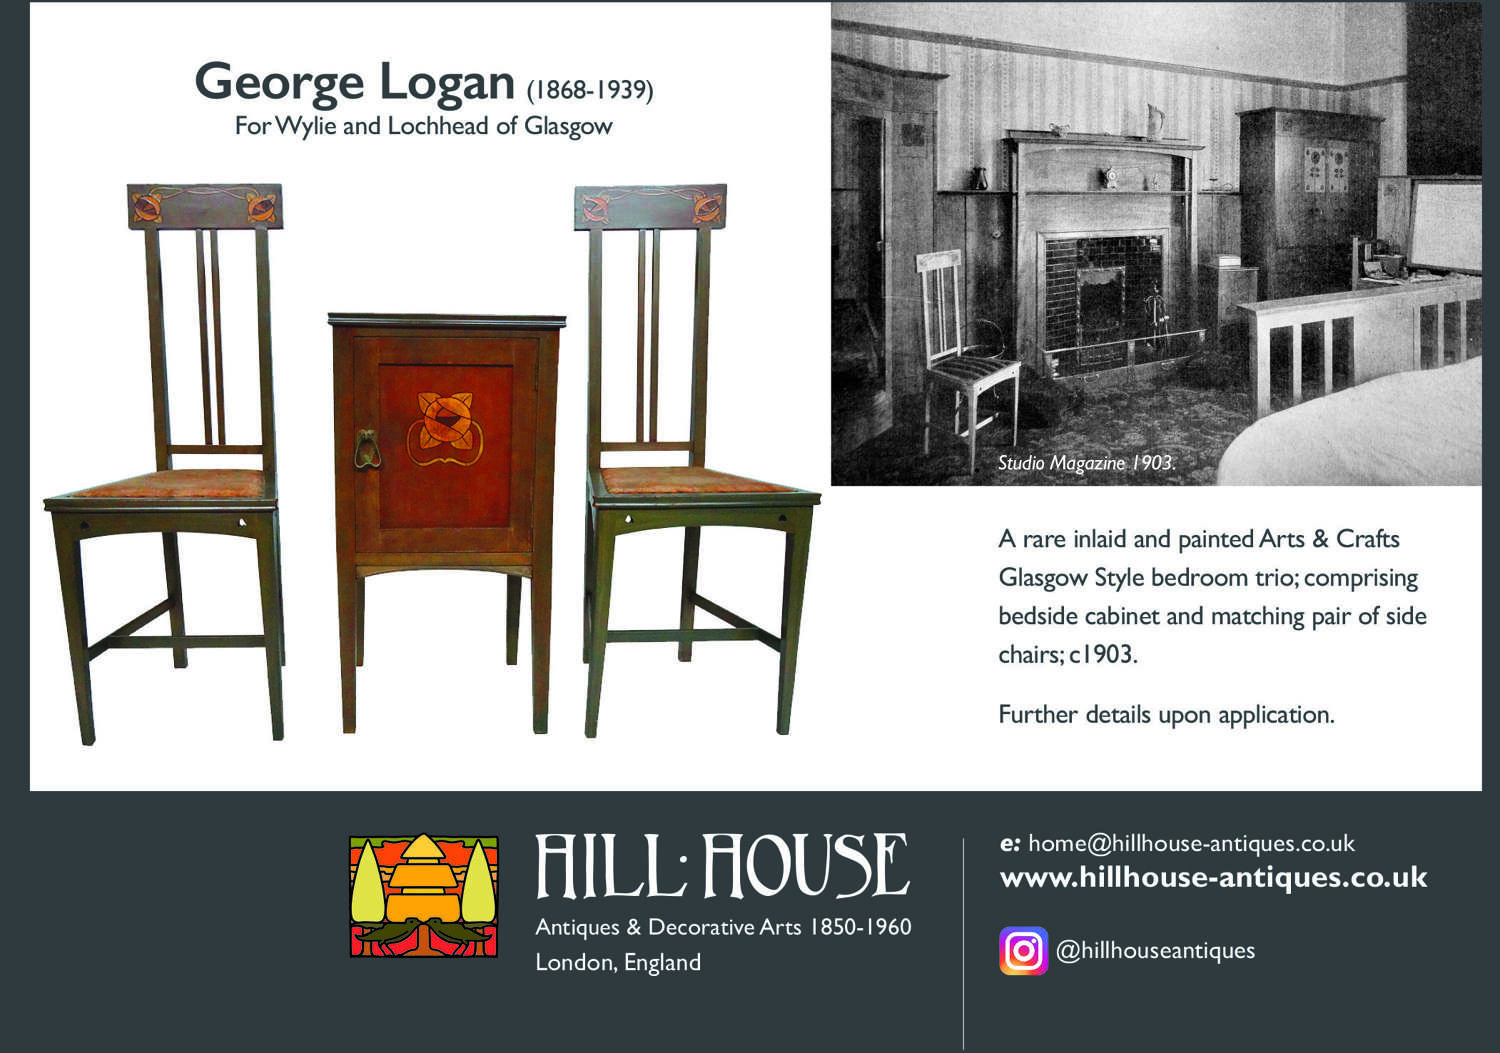 Rare George Logan Arts & Crafts Glasgow Style pair of chairs & cabinet